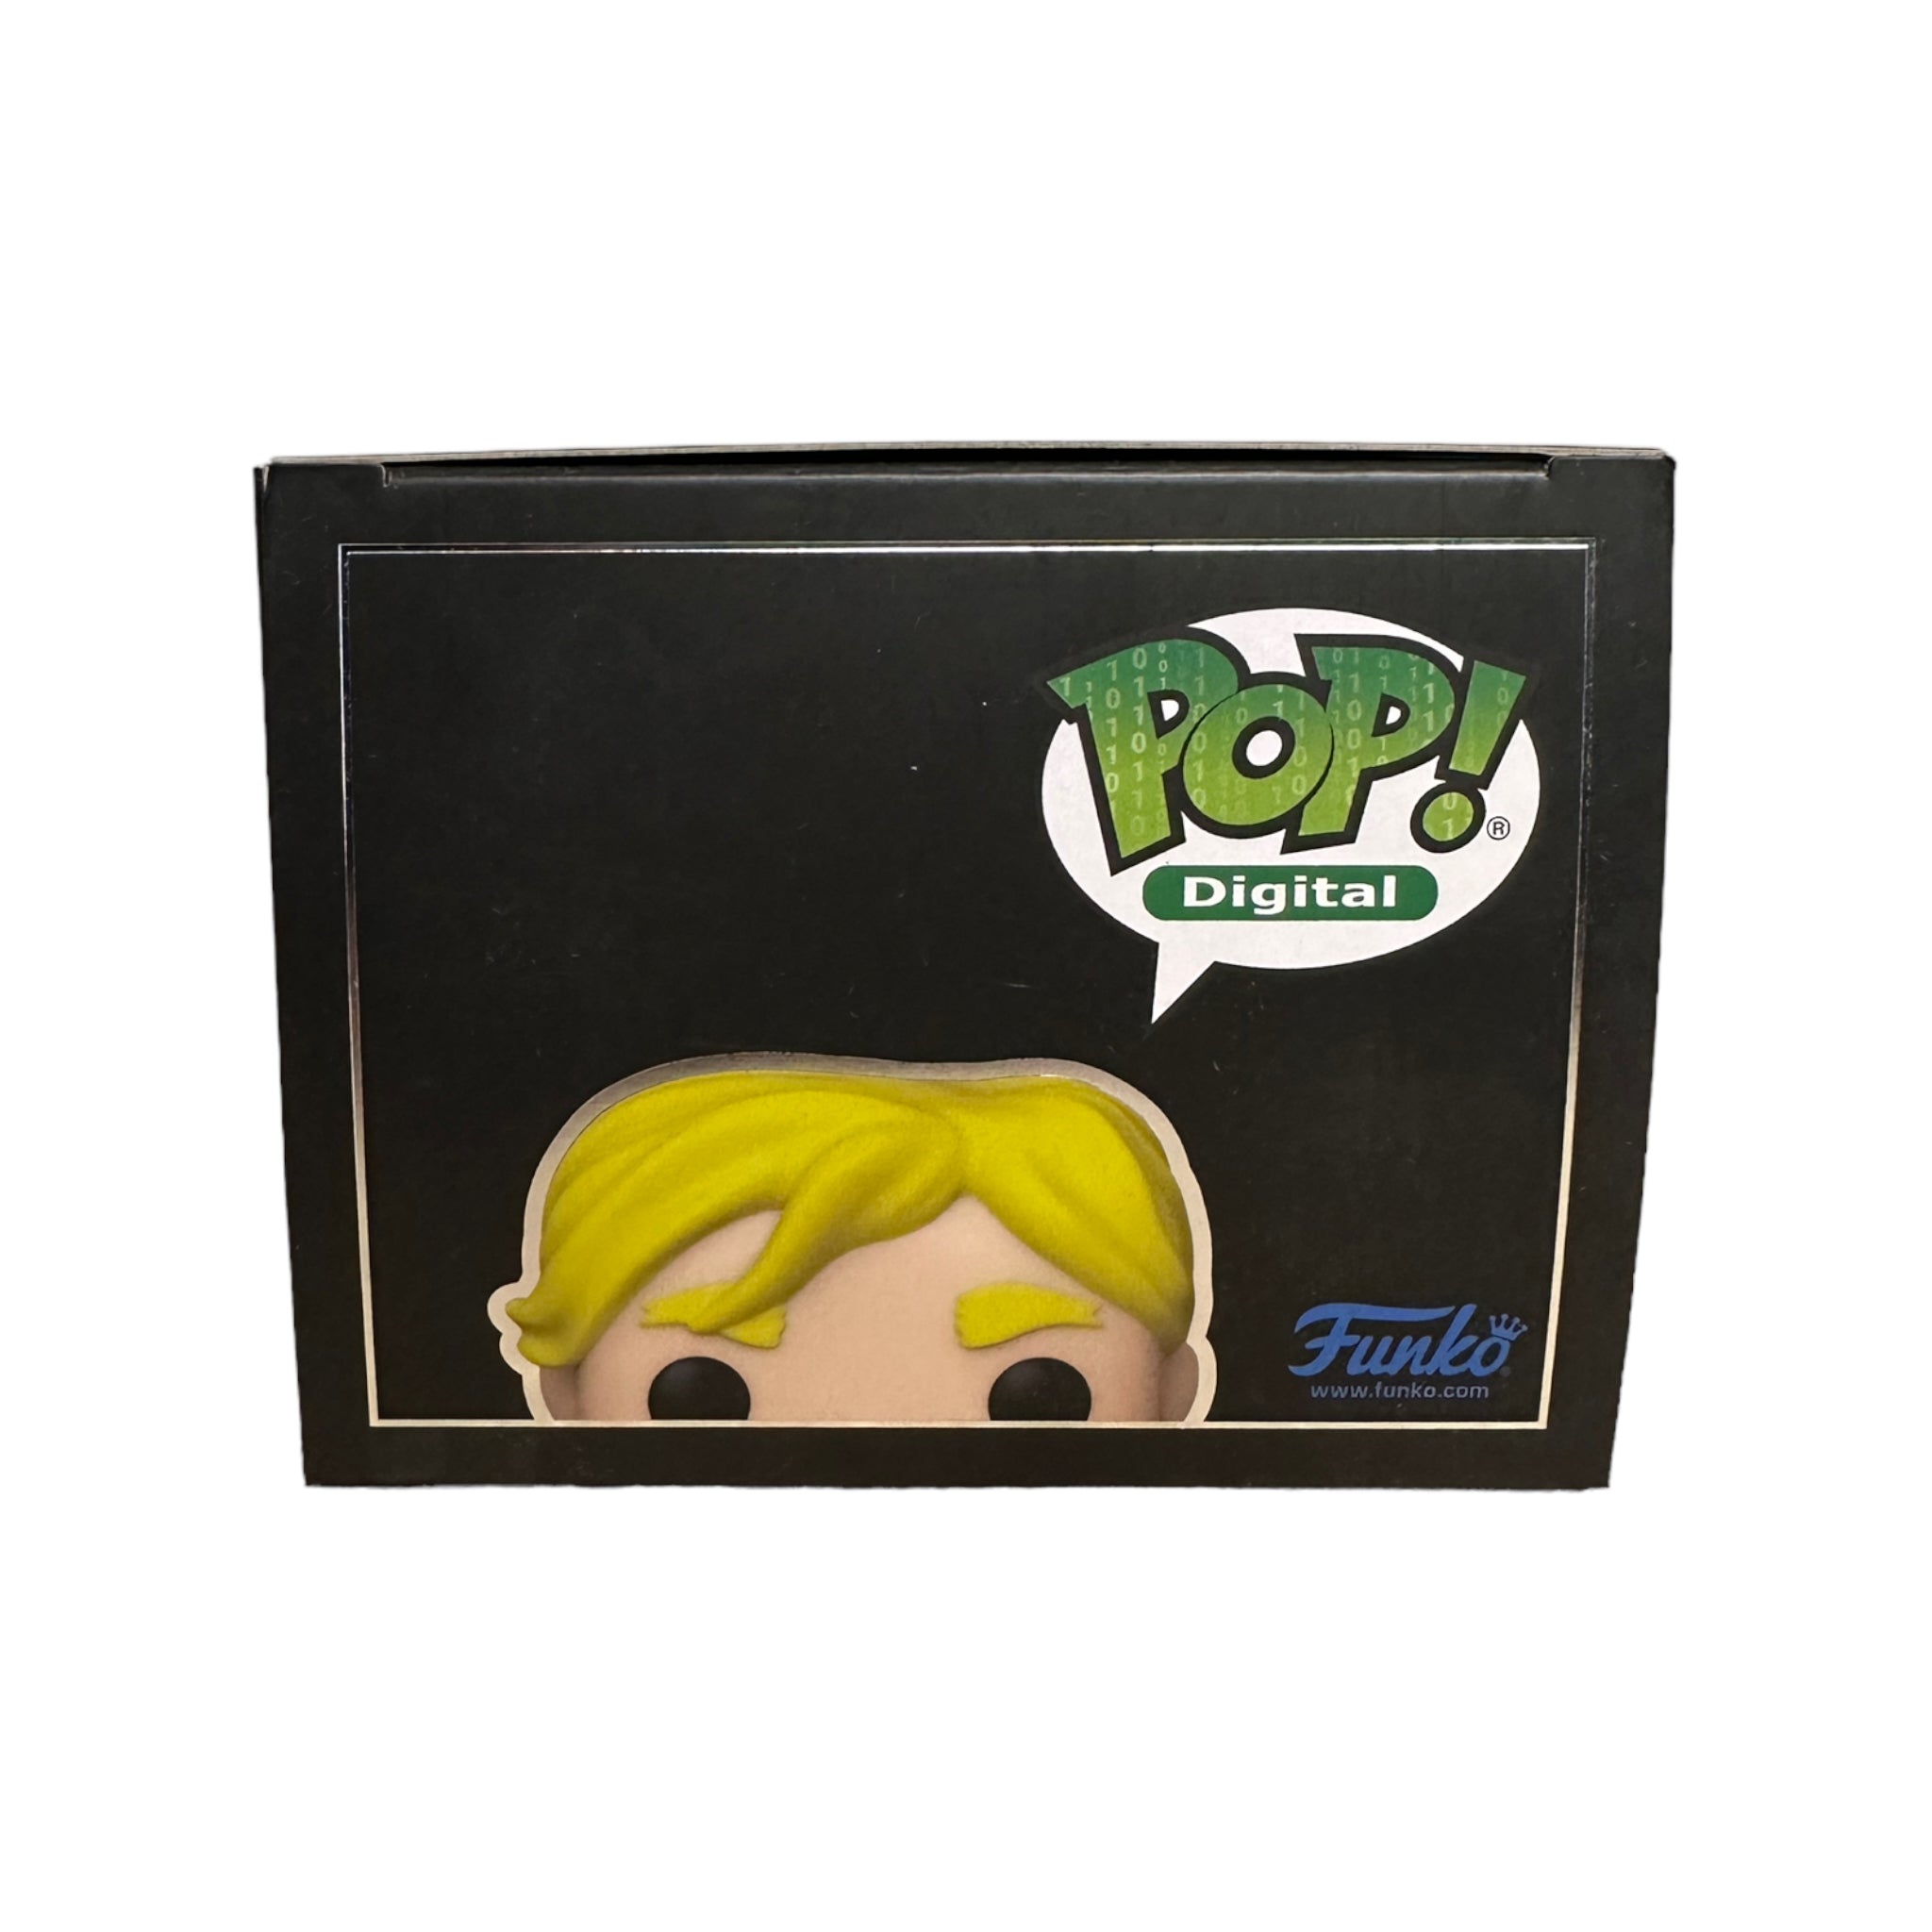 Stretch Armstrong #126 Funko Pop! - Retro Toys - NFT Release Exclusive LE1550 Pcs - Condition 9/10